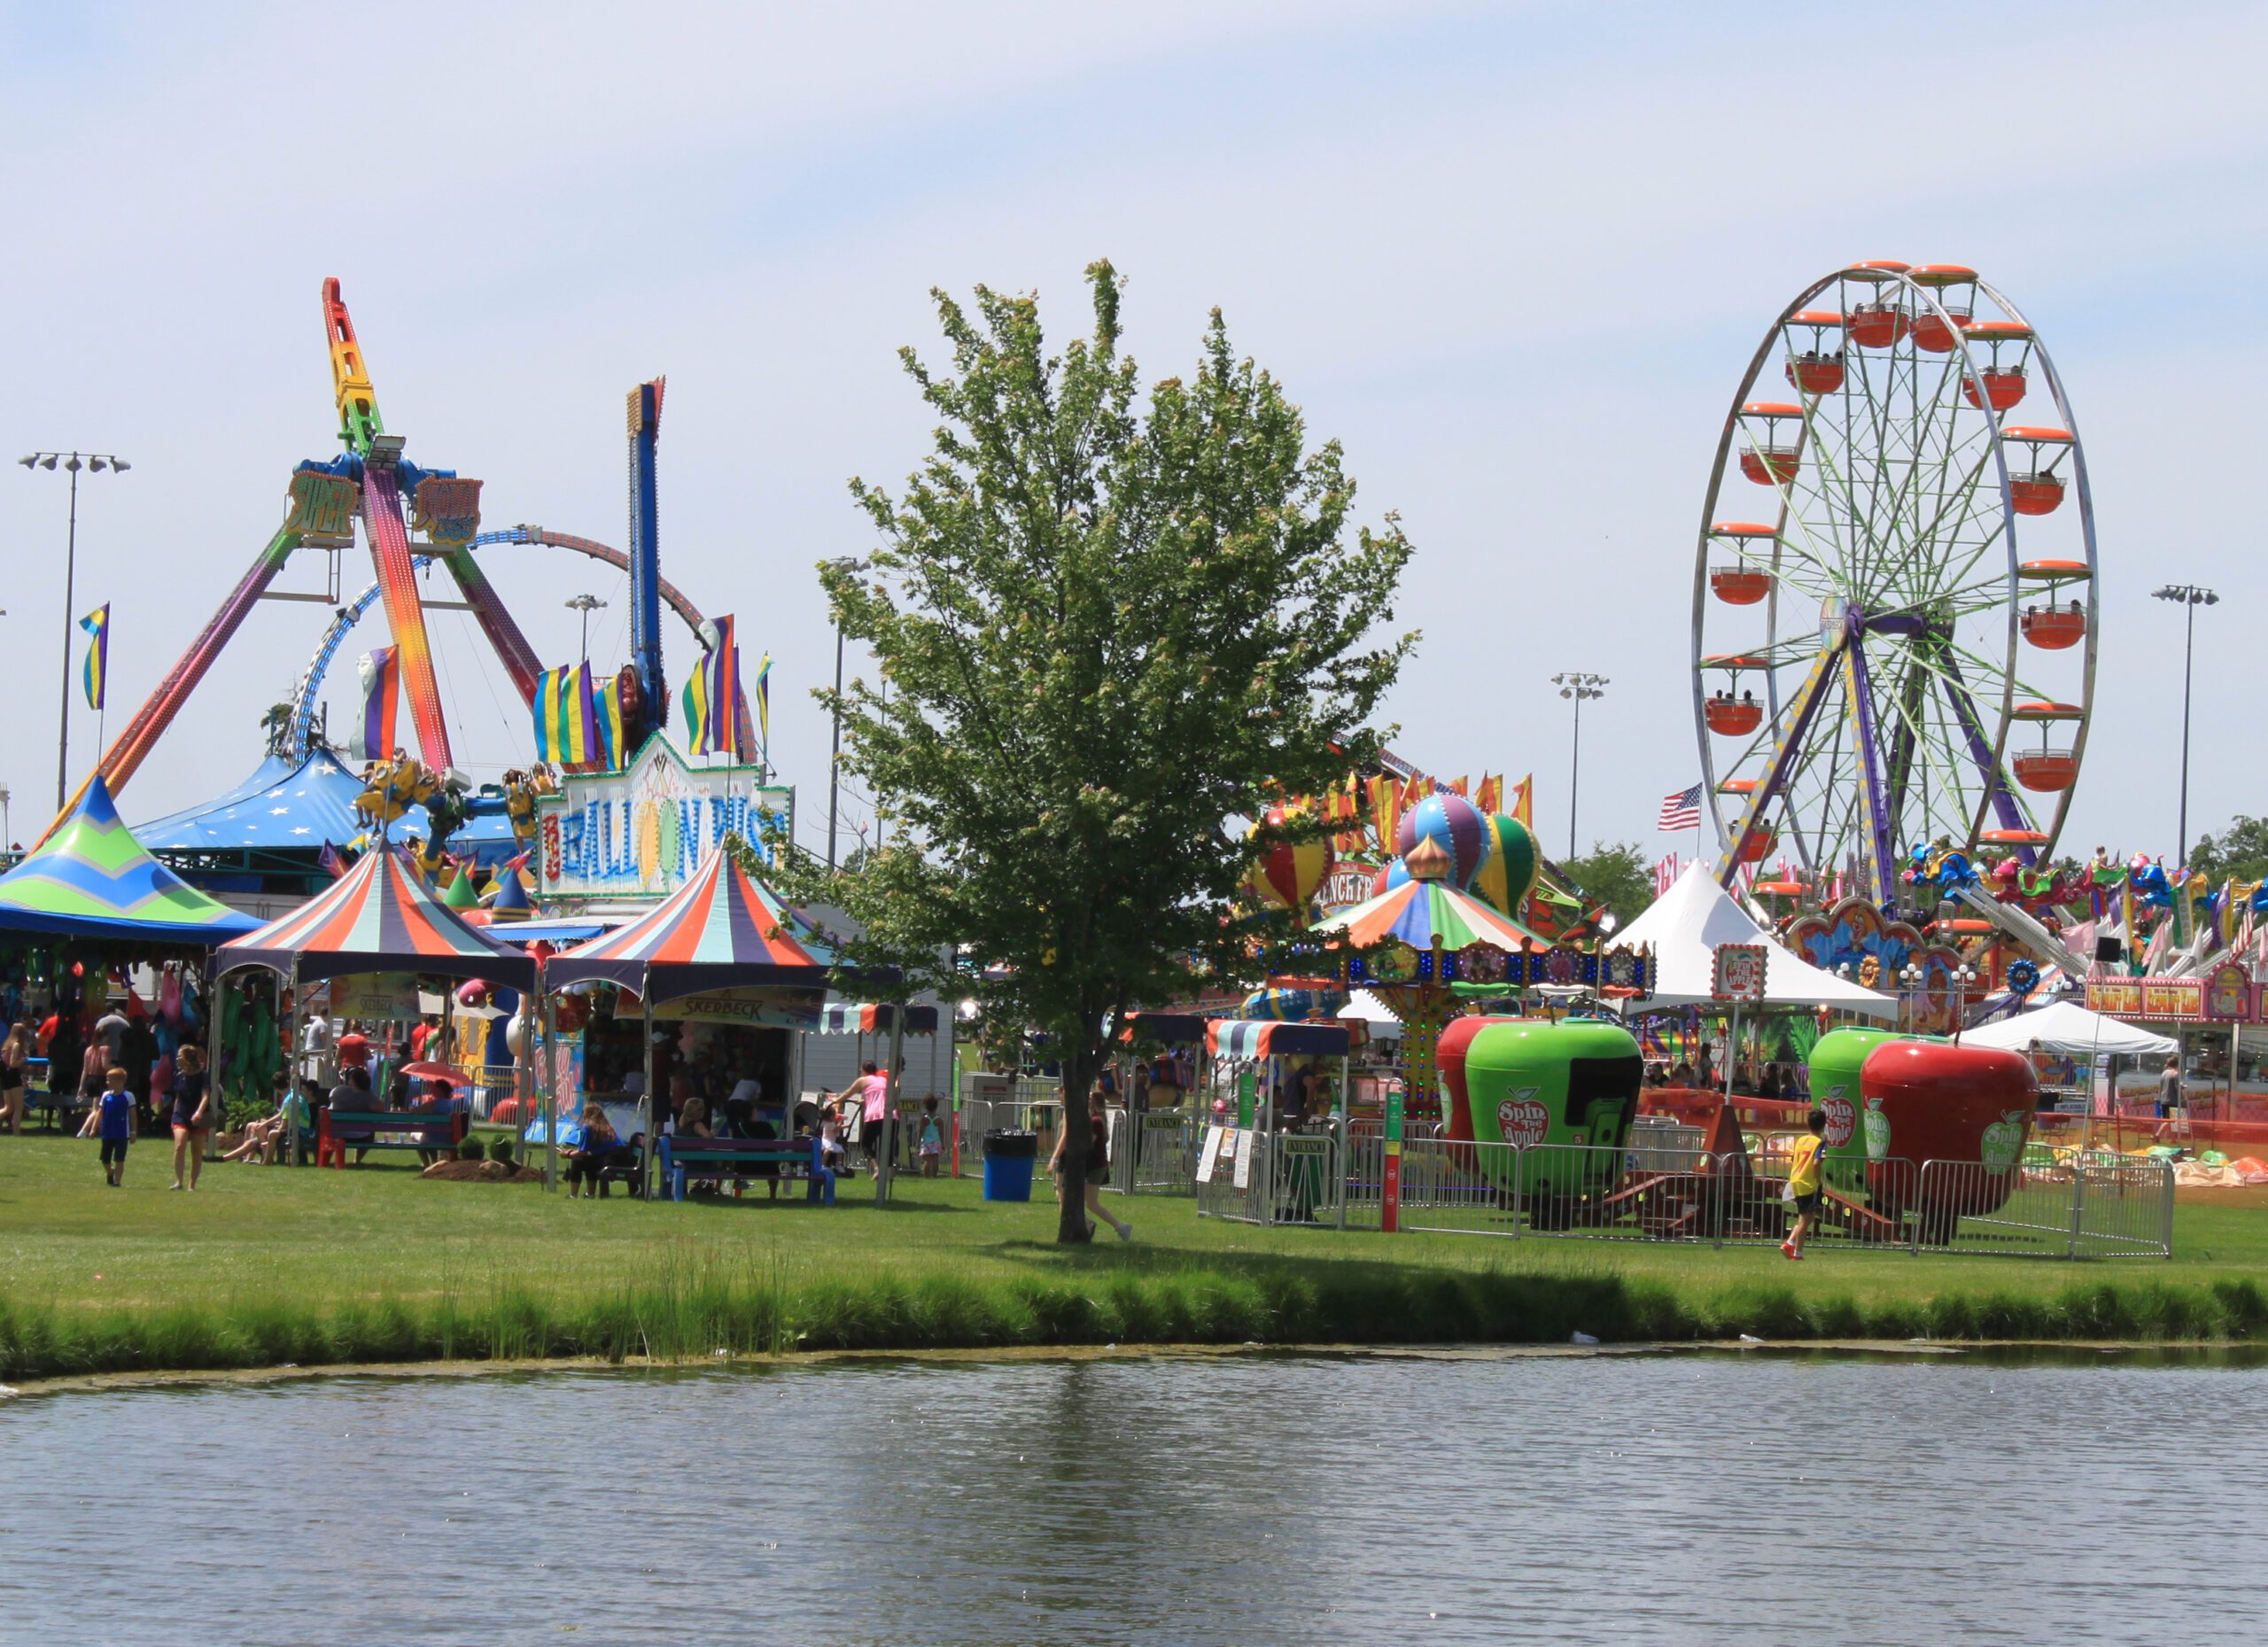 Liberty Fest is annually one of the most attended events in western Wayne County